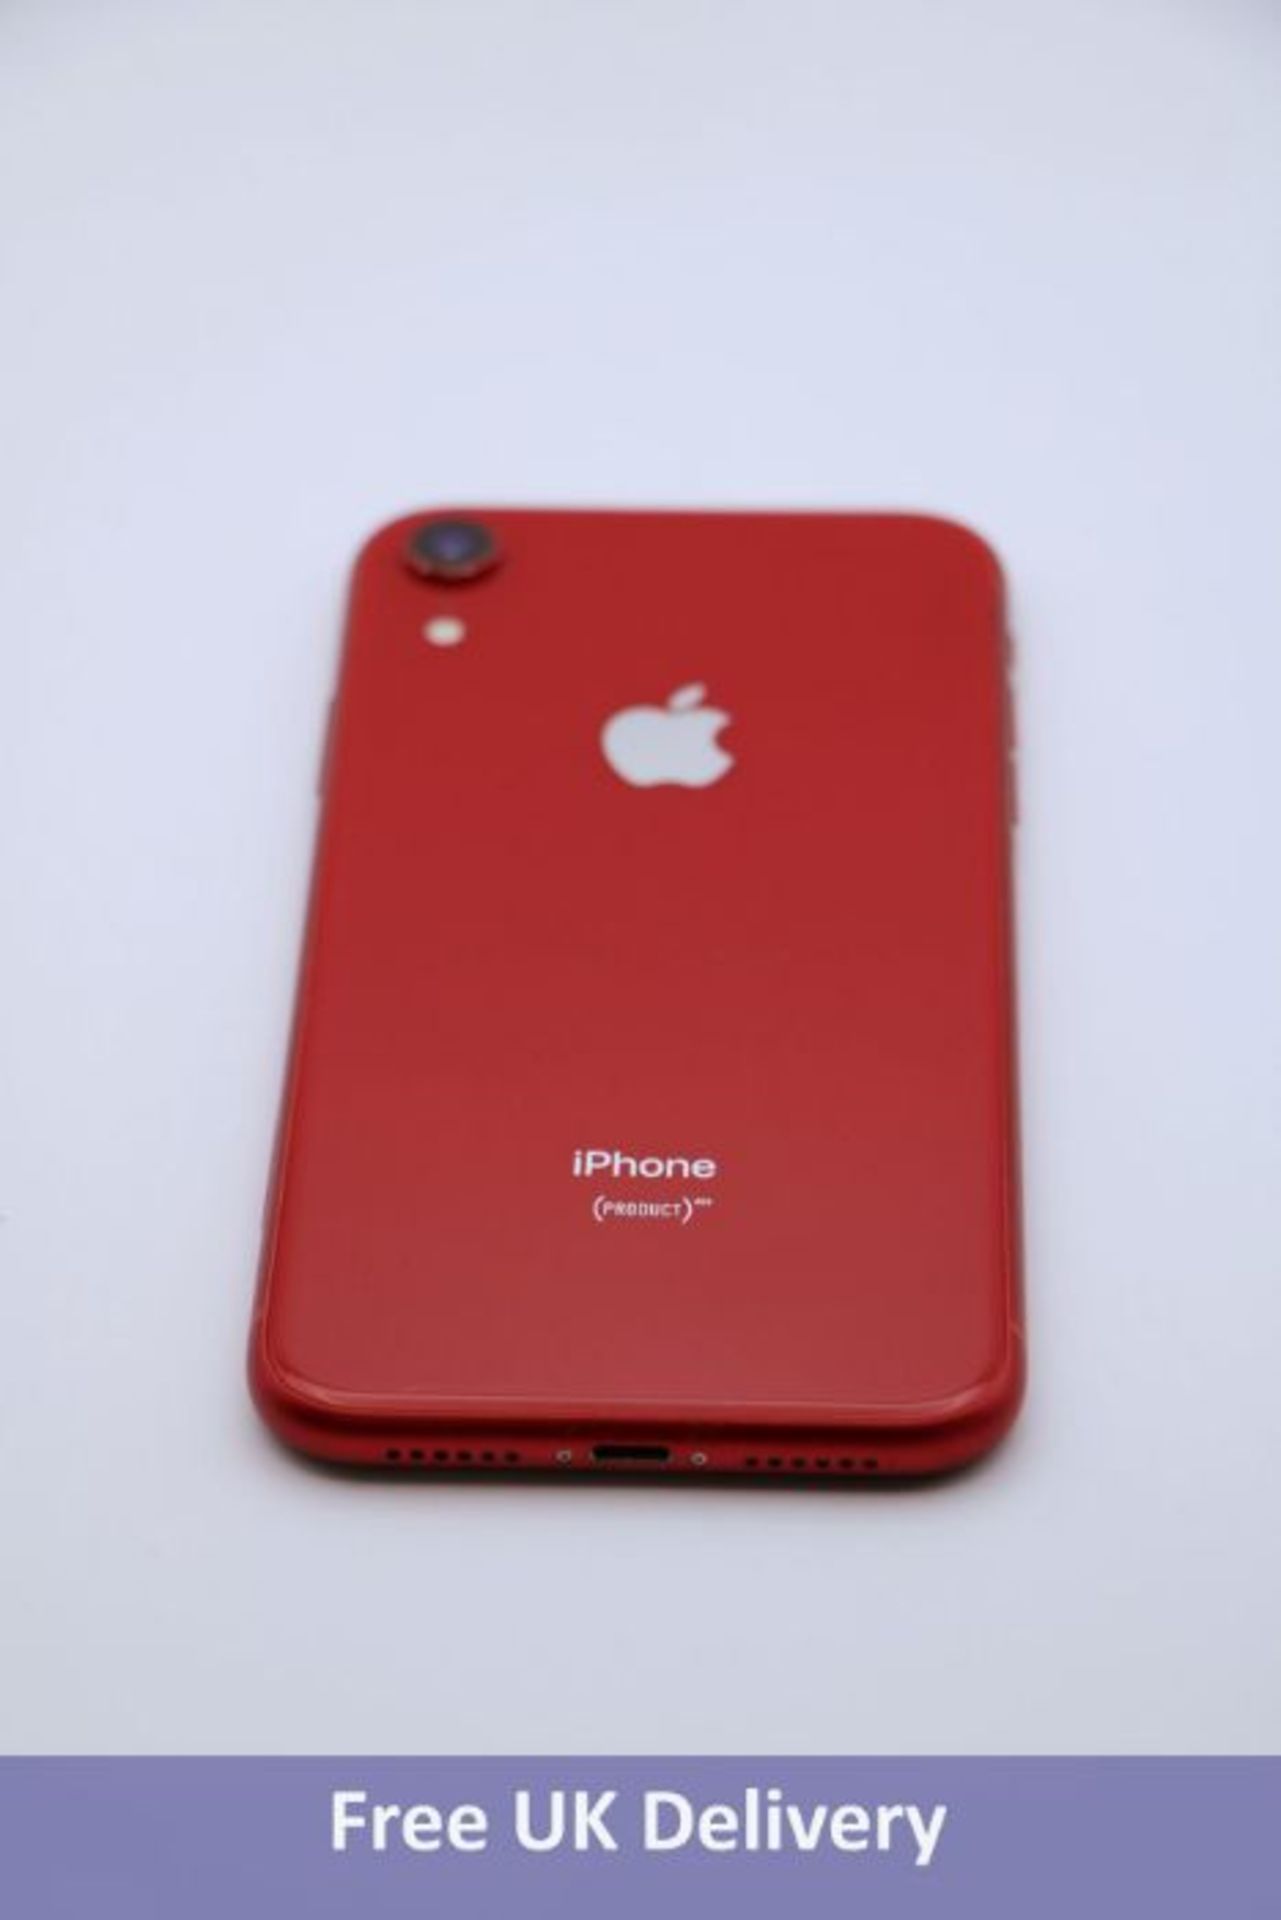 Apple iPhone XR 128GB Red, A1984. Used, refurbished, no box or accessories. Checkmend clear, ref. CM - Image 2 of 2